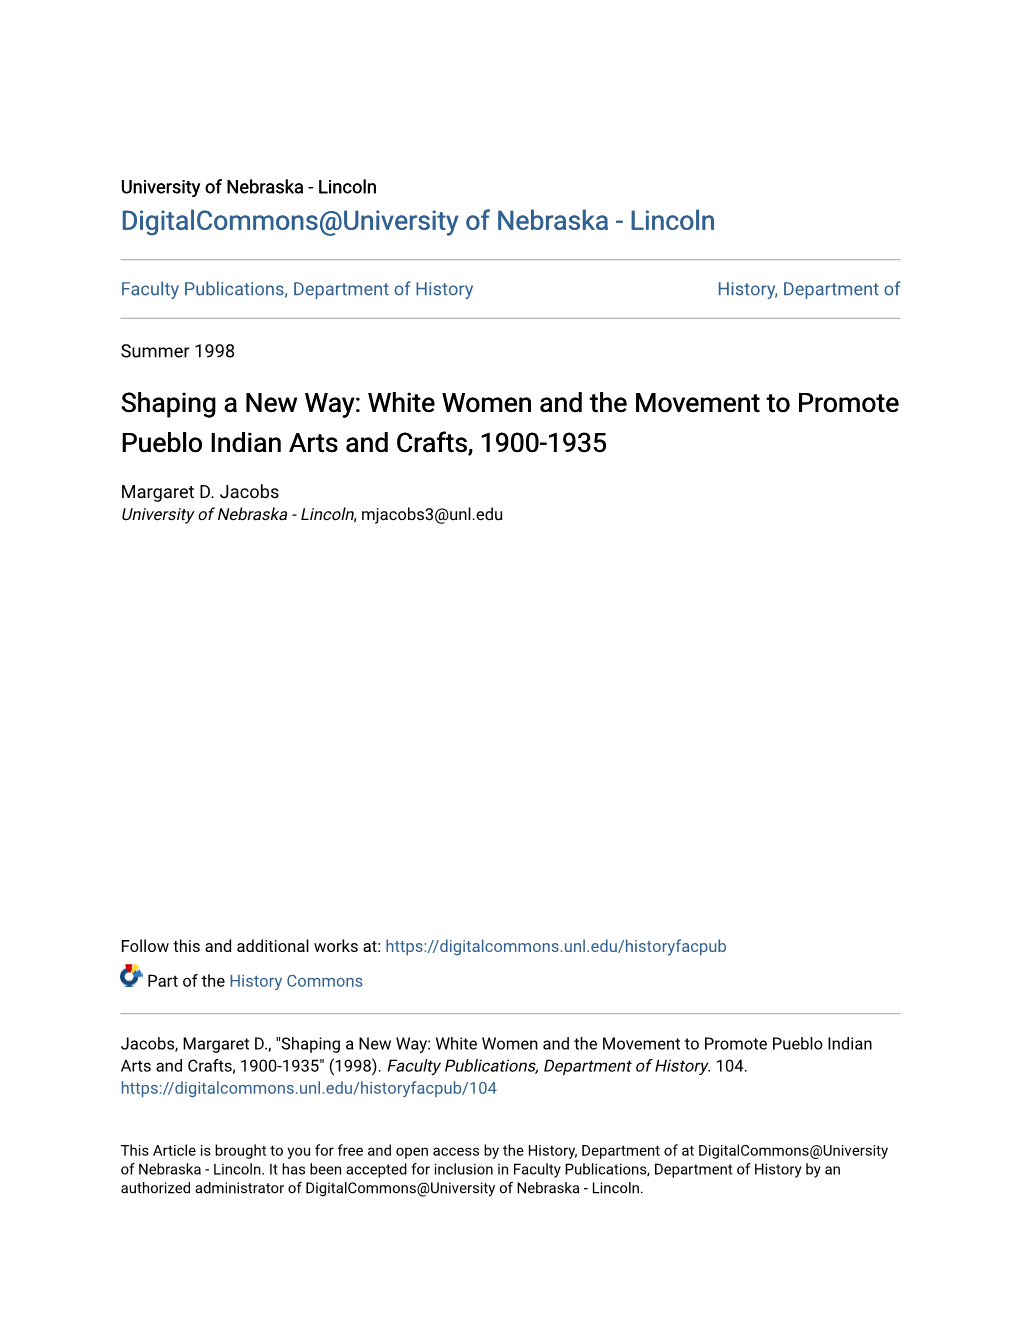 White Women and the Movement to Promote Pueblo Indian Arts and Crafts, 1900-1935